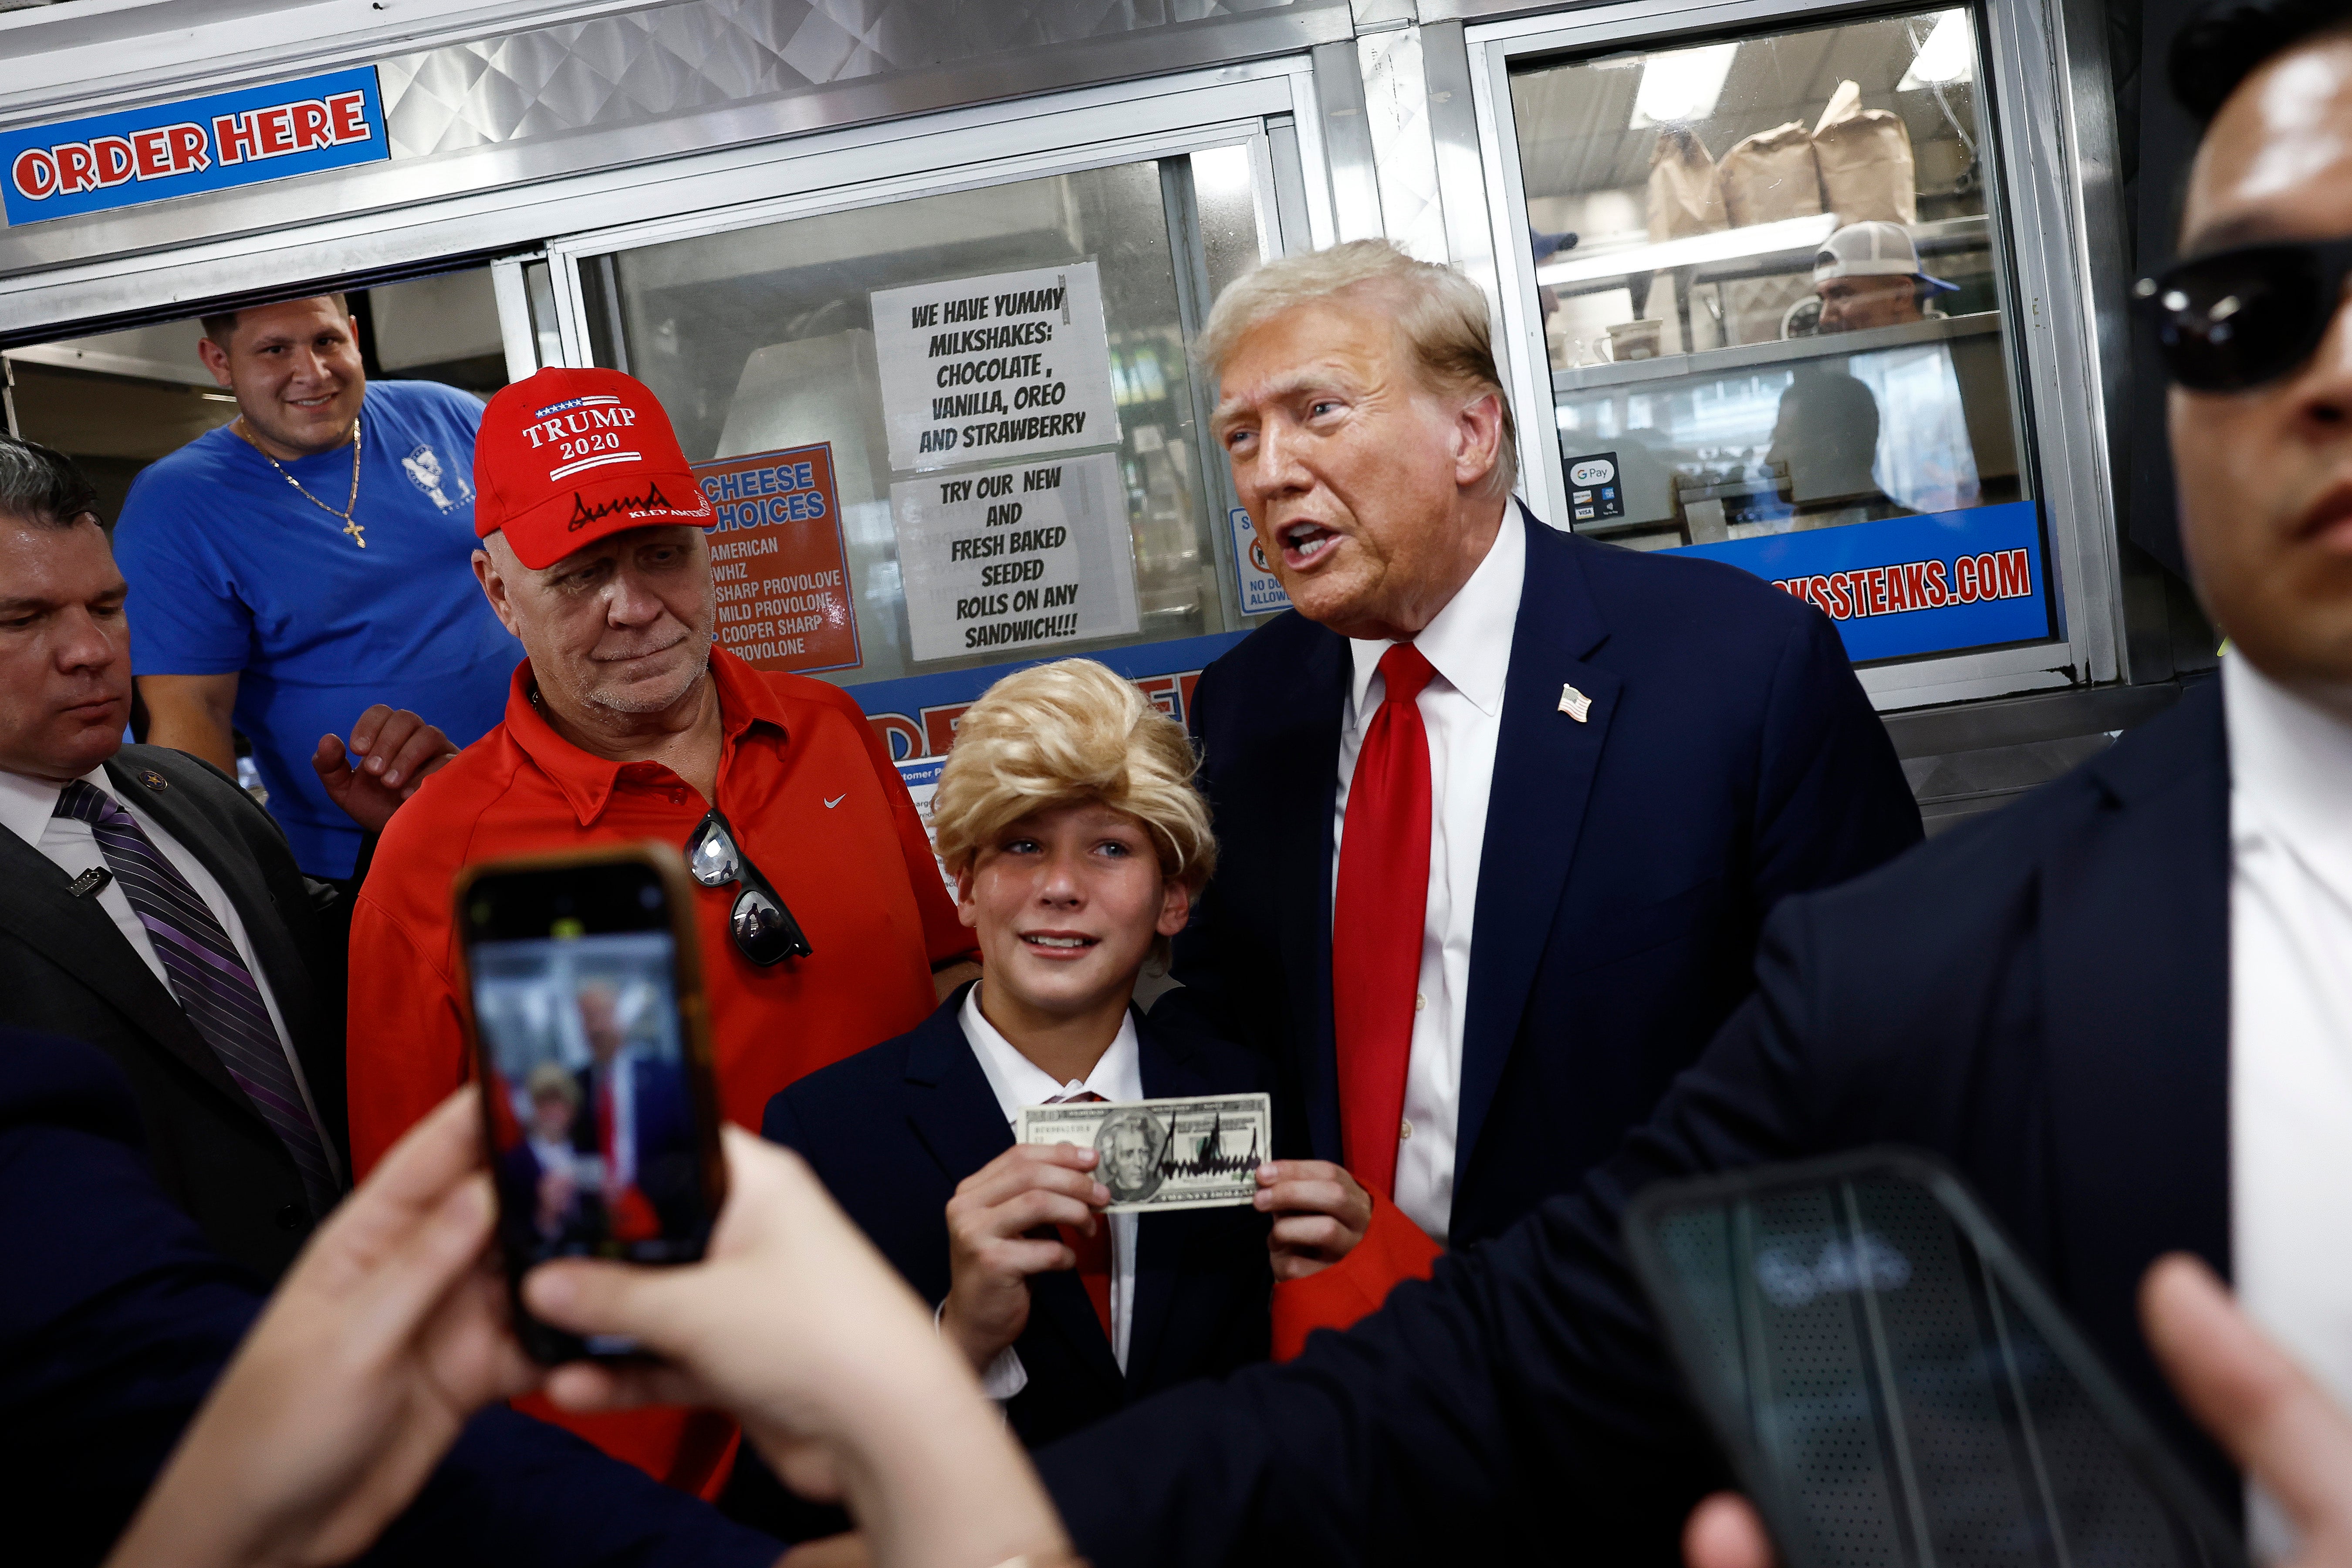 Mini-me: Donald Trump poses with a young fan at a sandwich shop in Philadelphia earlier this month